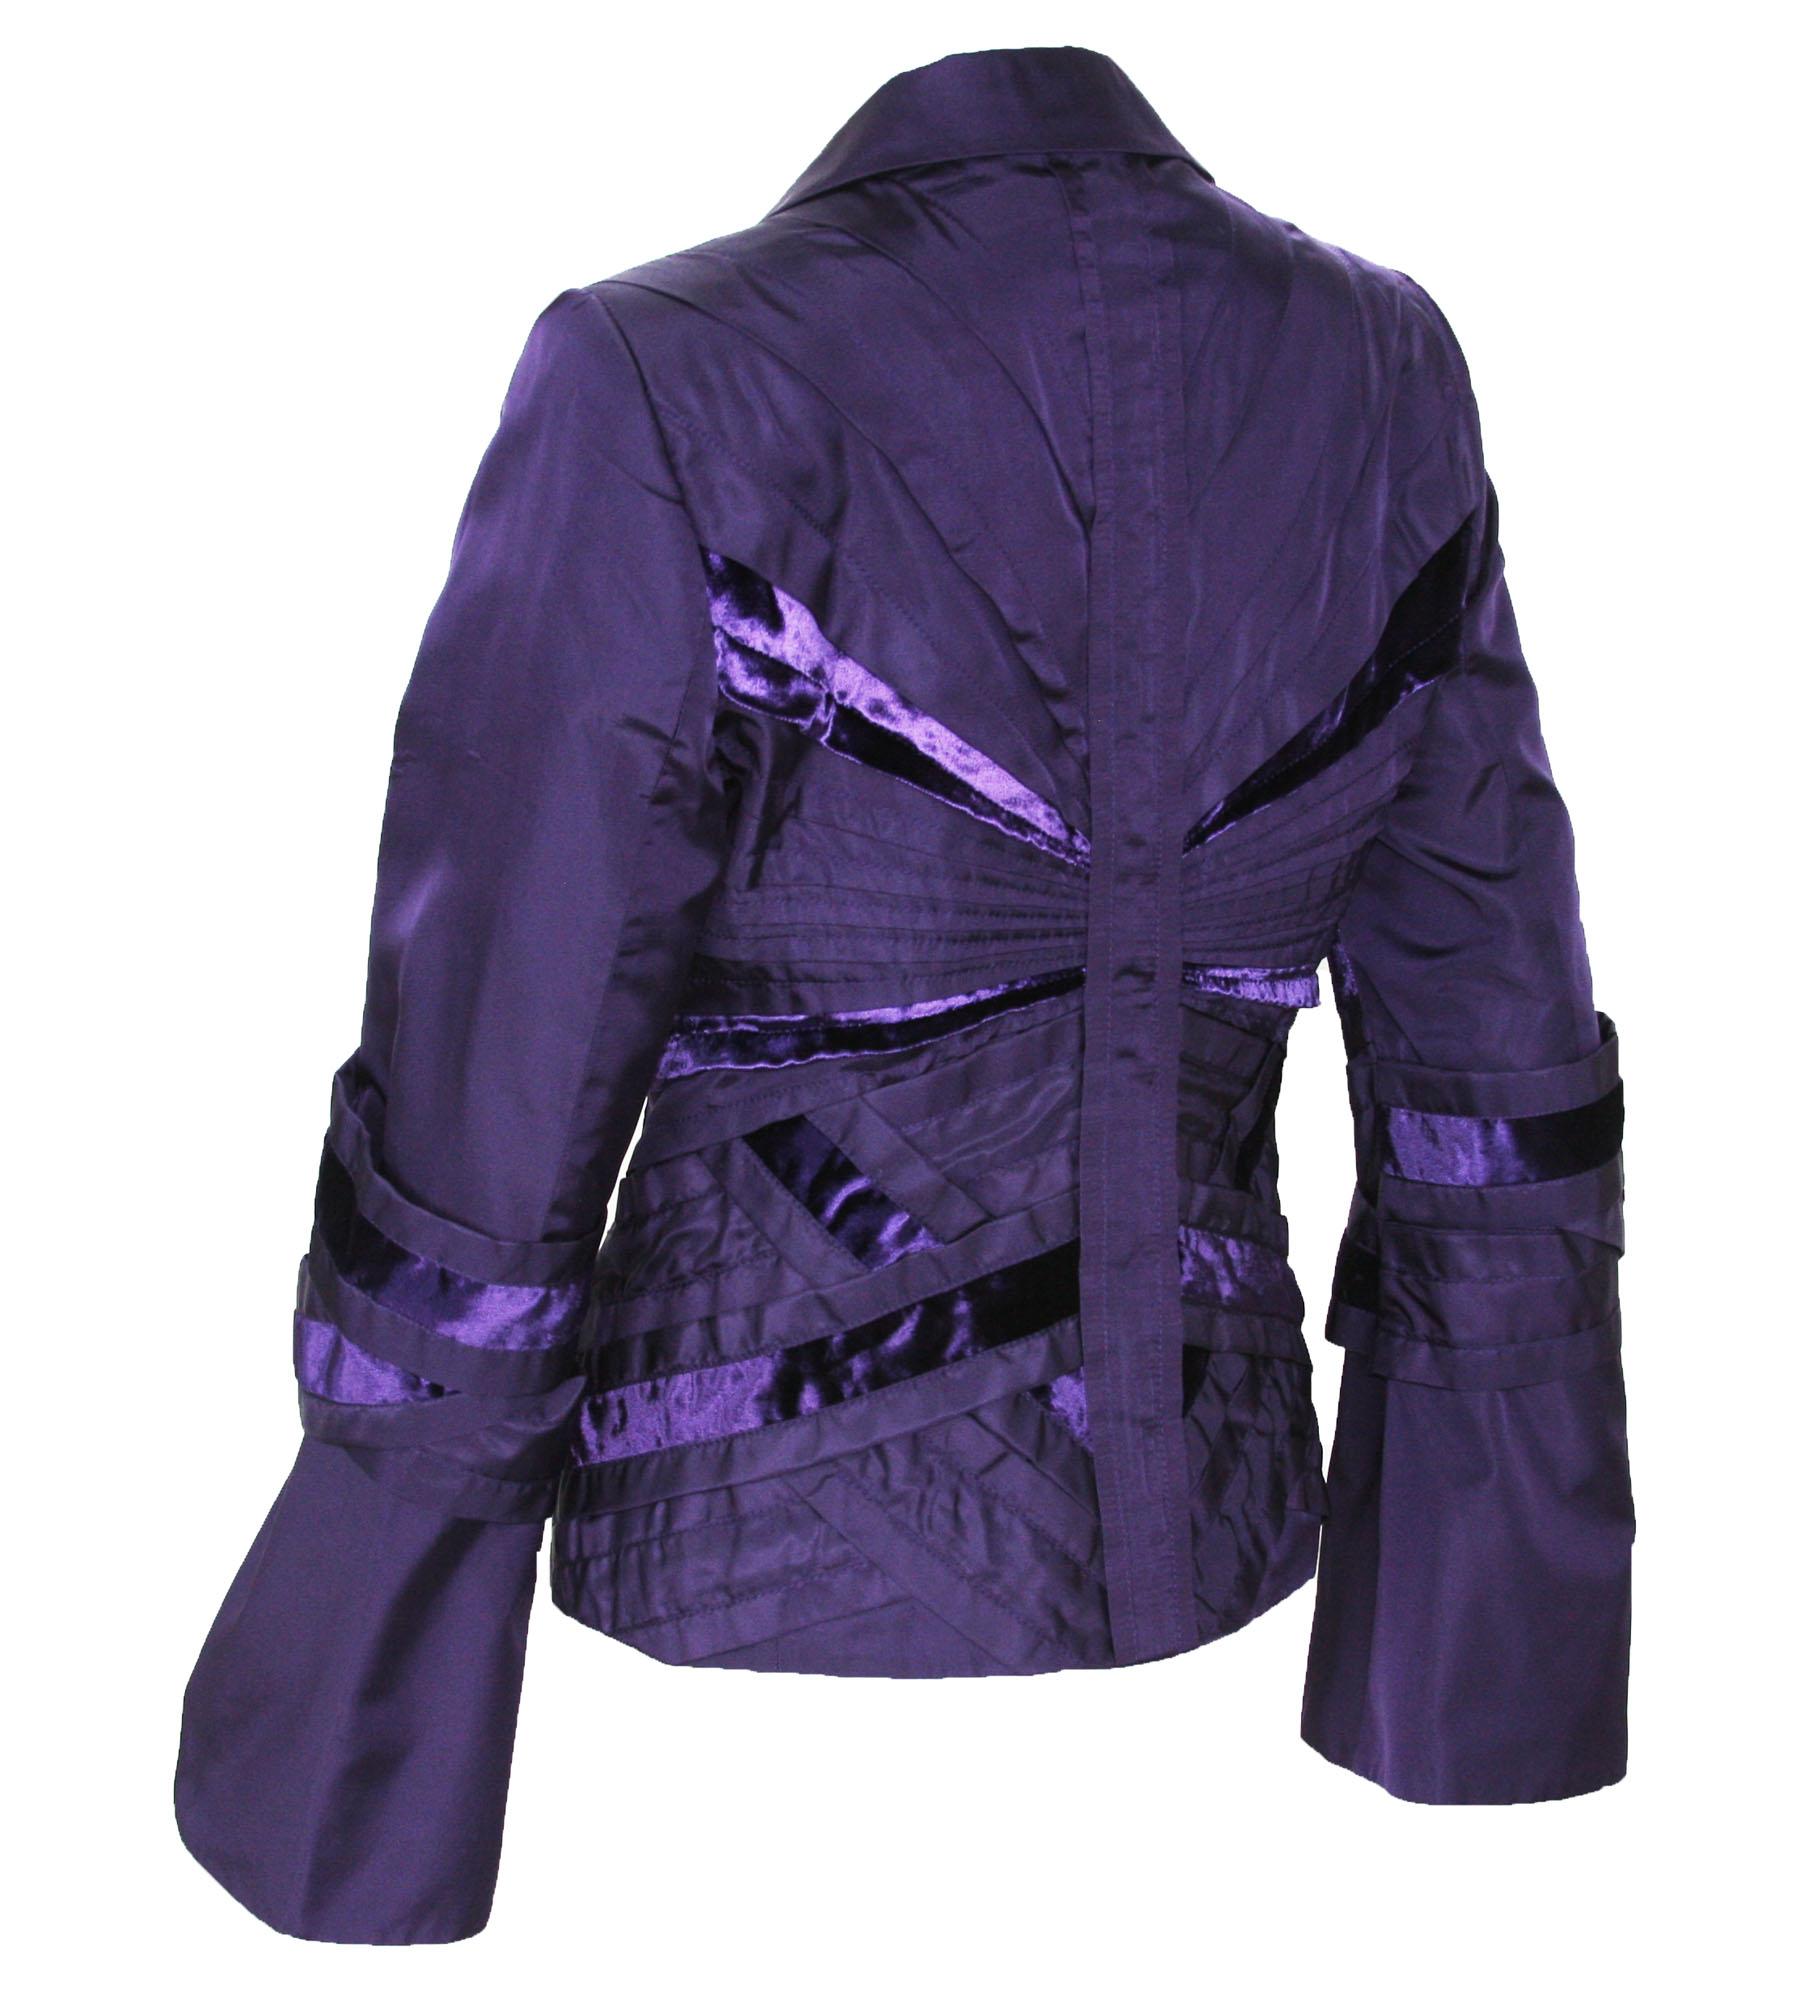 Tom Ford for Gucci F/W 2004 Runway Collection Purple Silk Taffeta Jacket 42 - 6 For Sale 1